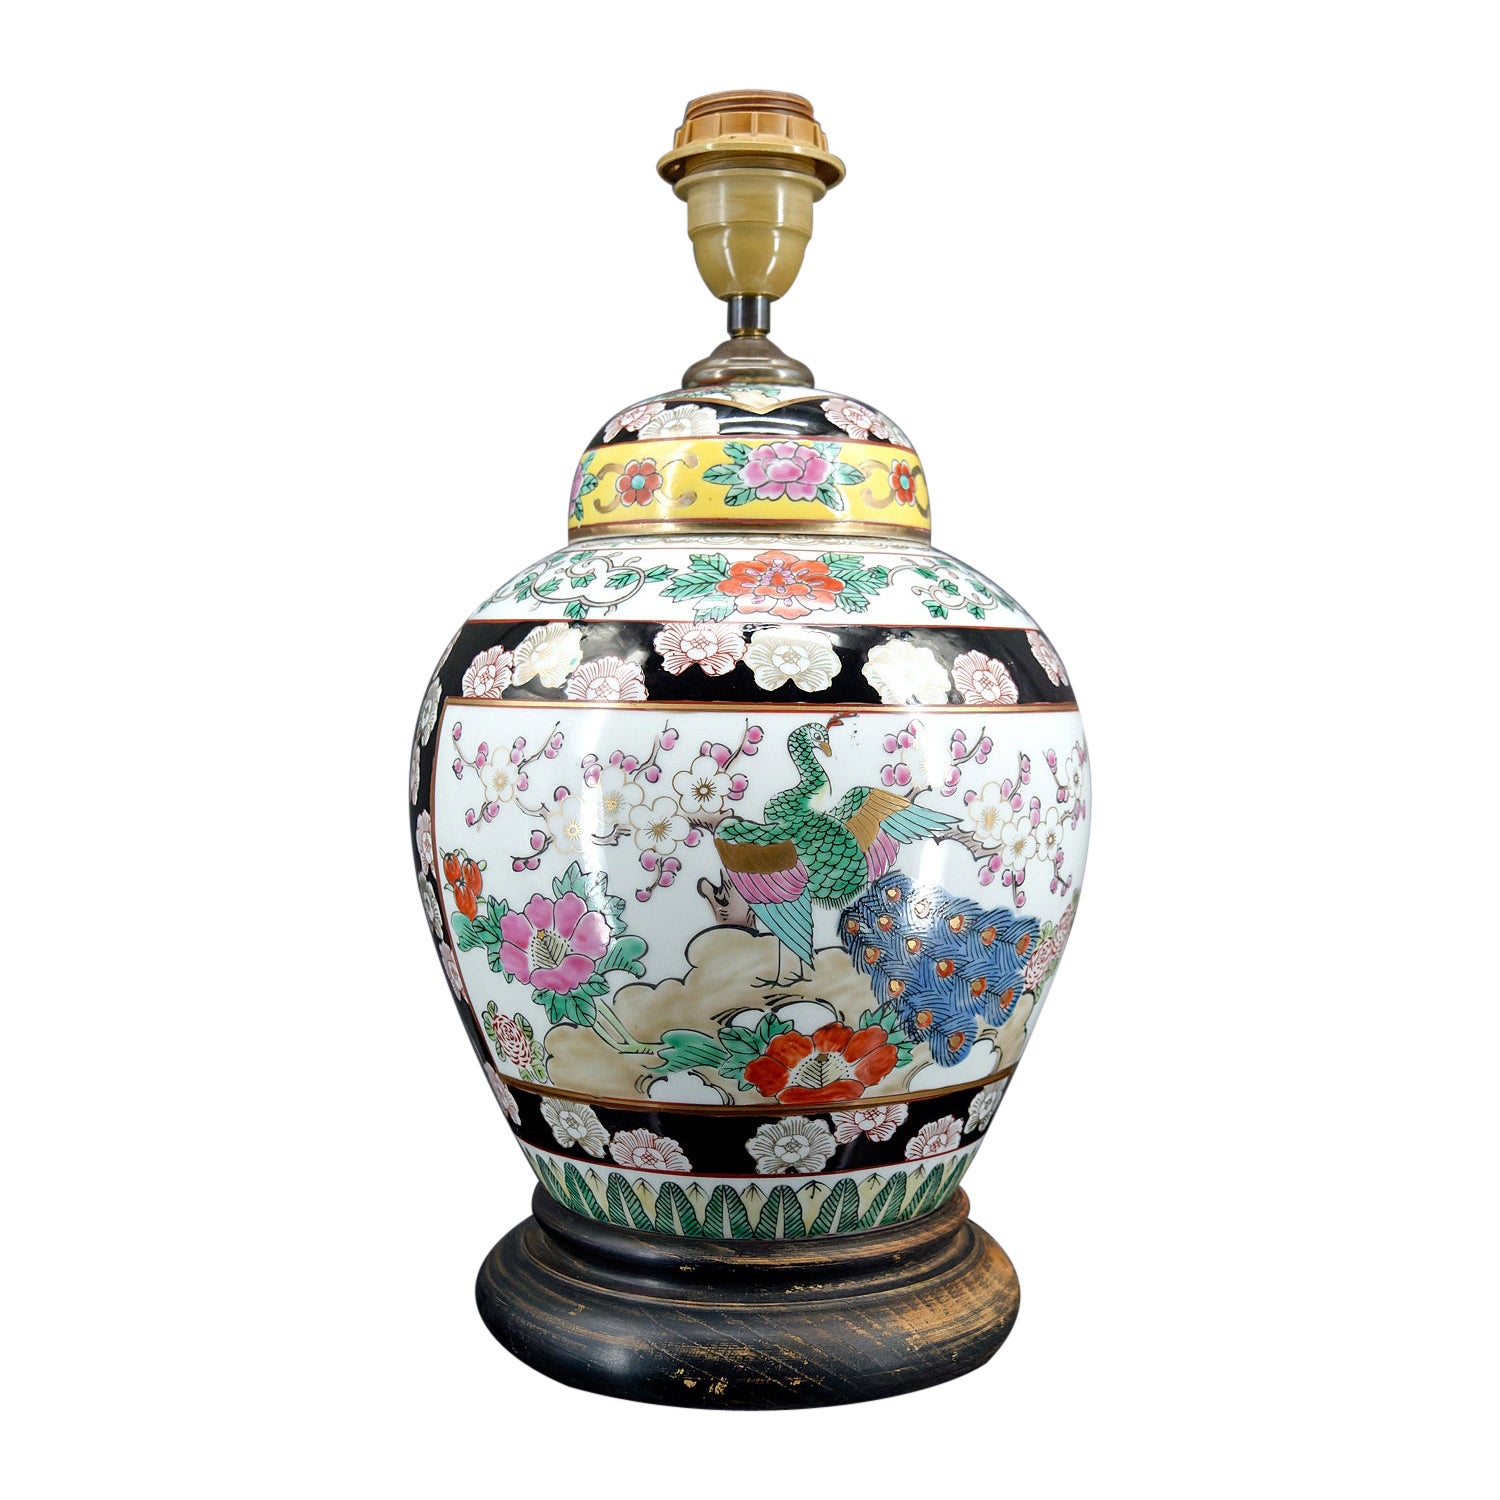 Chinese porcelain lamp decorated with flowers and peacocks, China, Early 20th